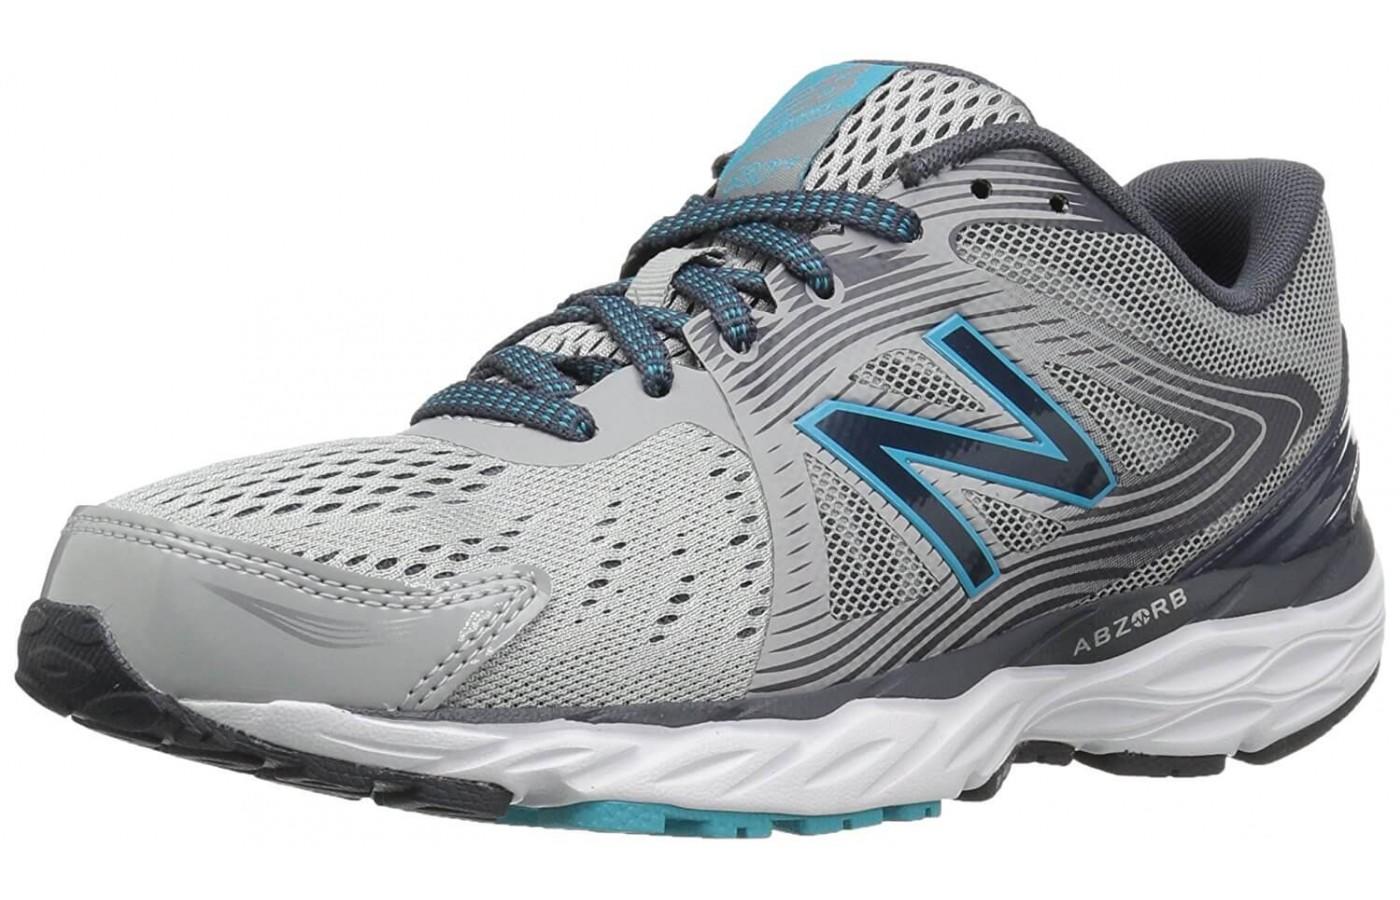 The New Balance 680V4 is a neutral shoe